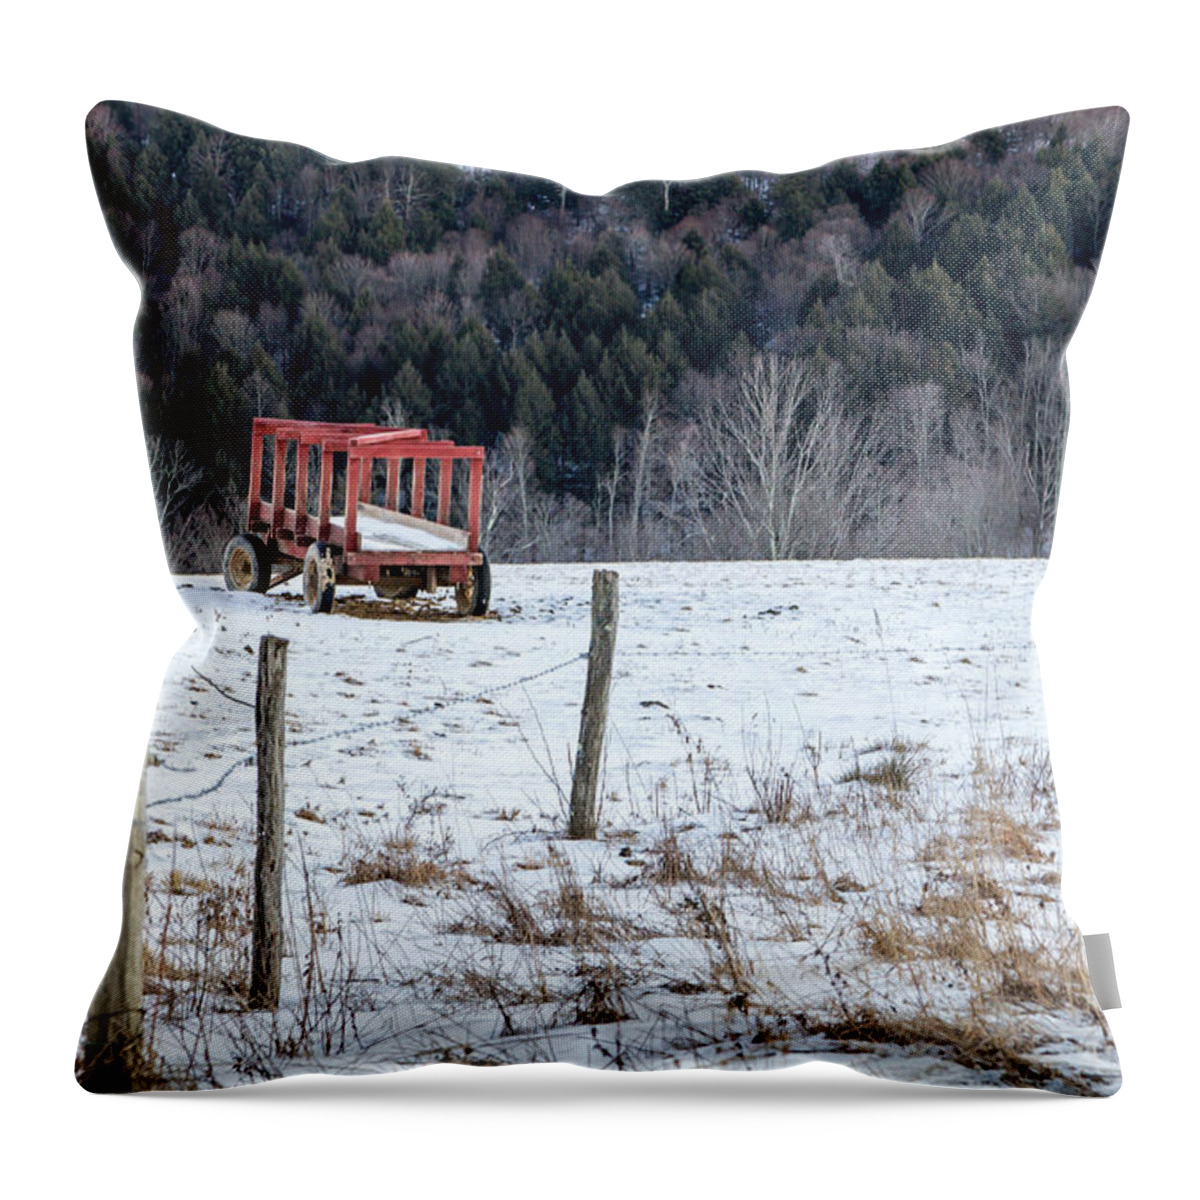 Red Throw Pillow featuring the photograph Red Hay Wagon by Frank Morales Jr